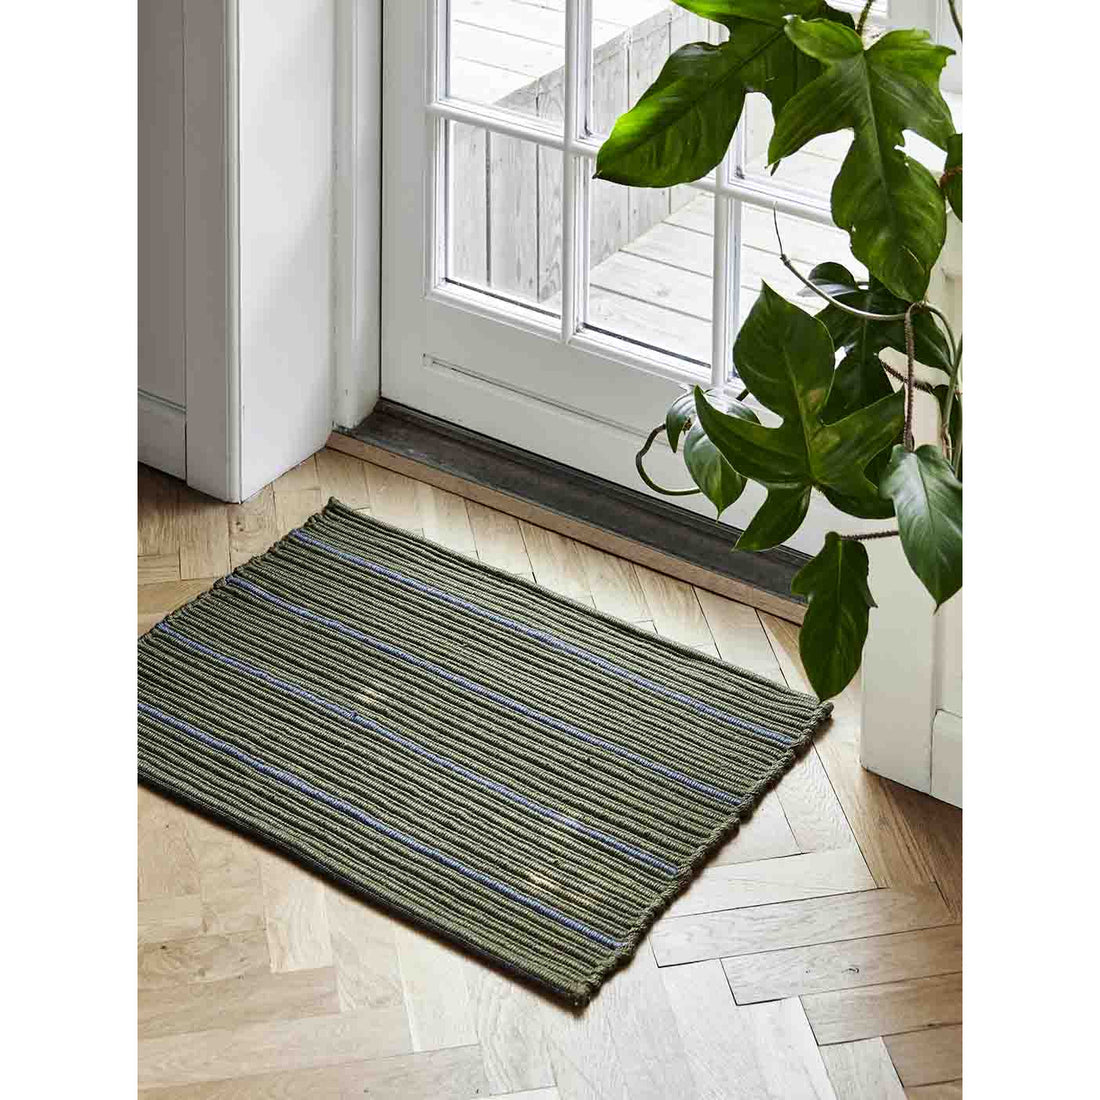 Stripe doormat 50x72 cm - olive/blue - recycled polyester